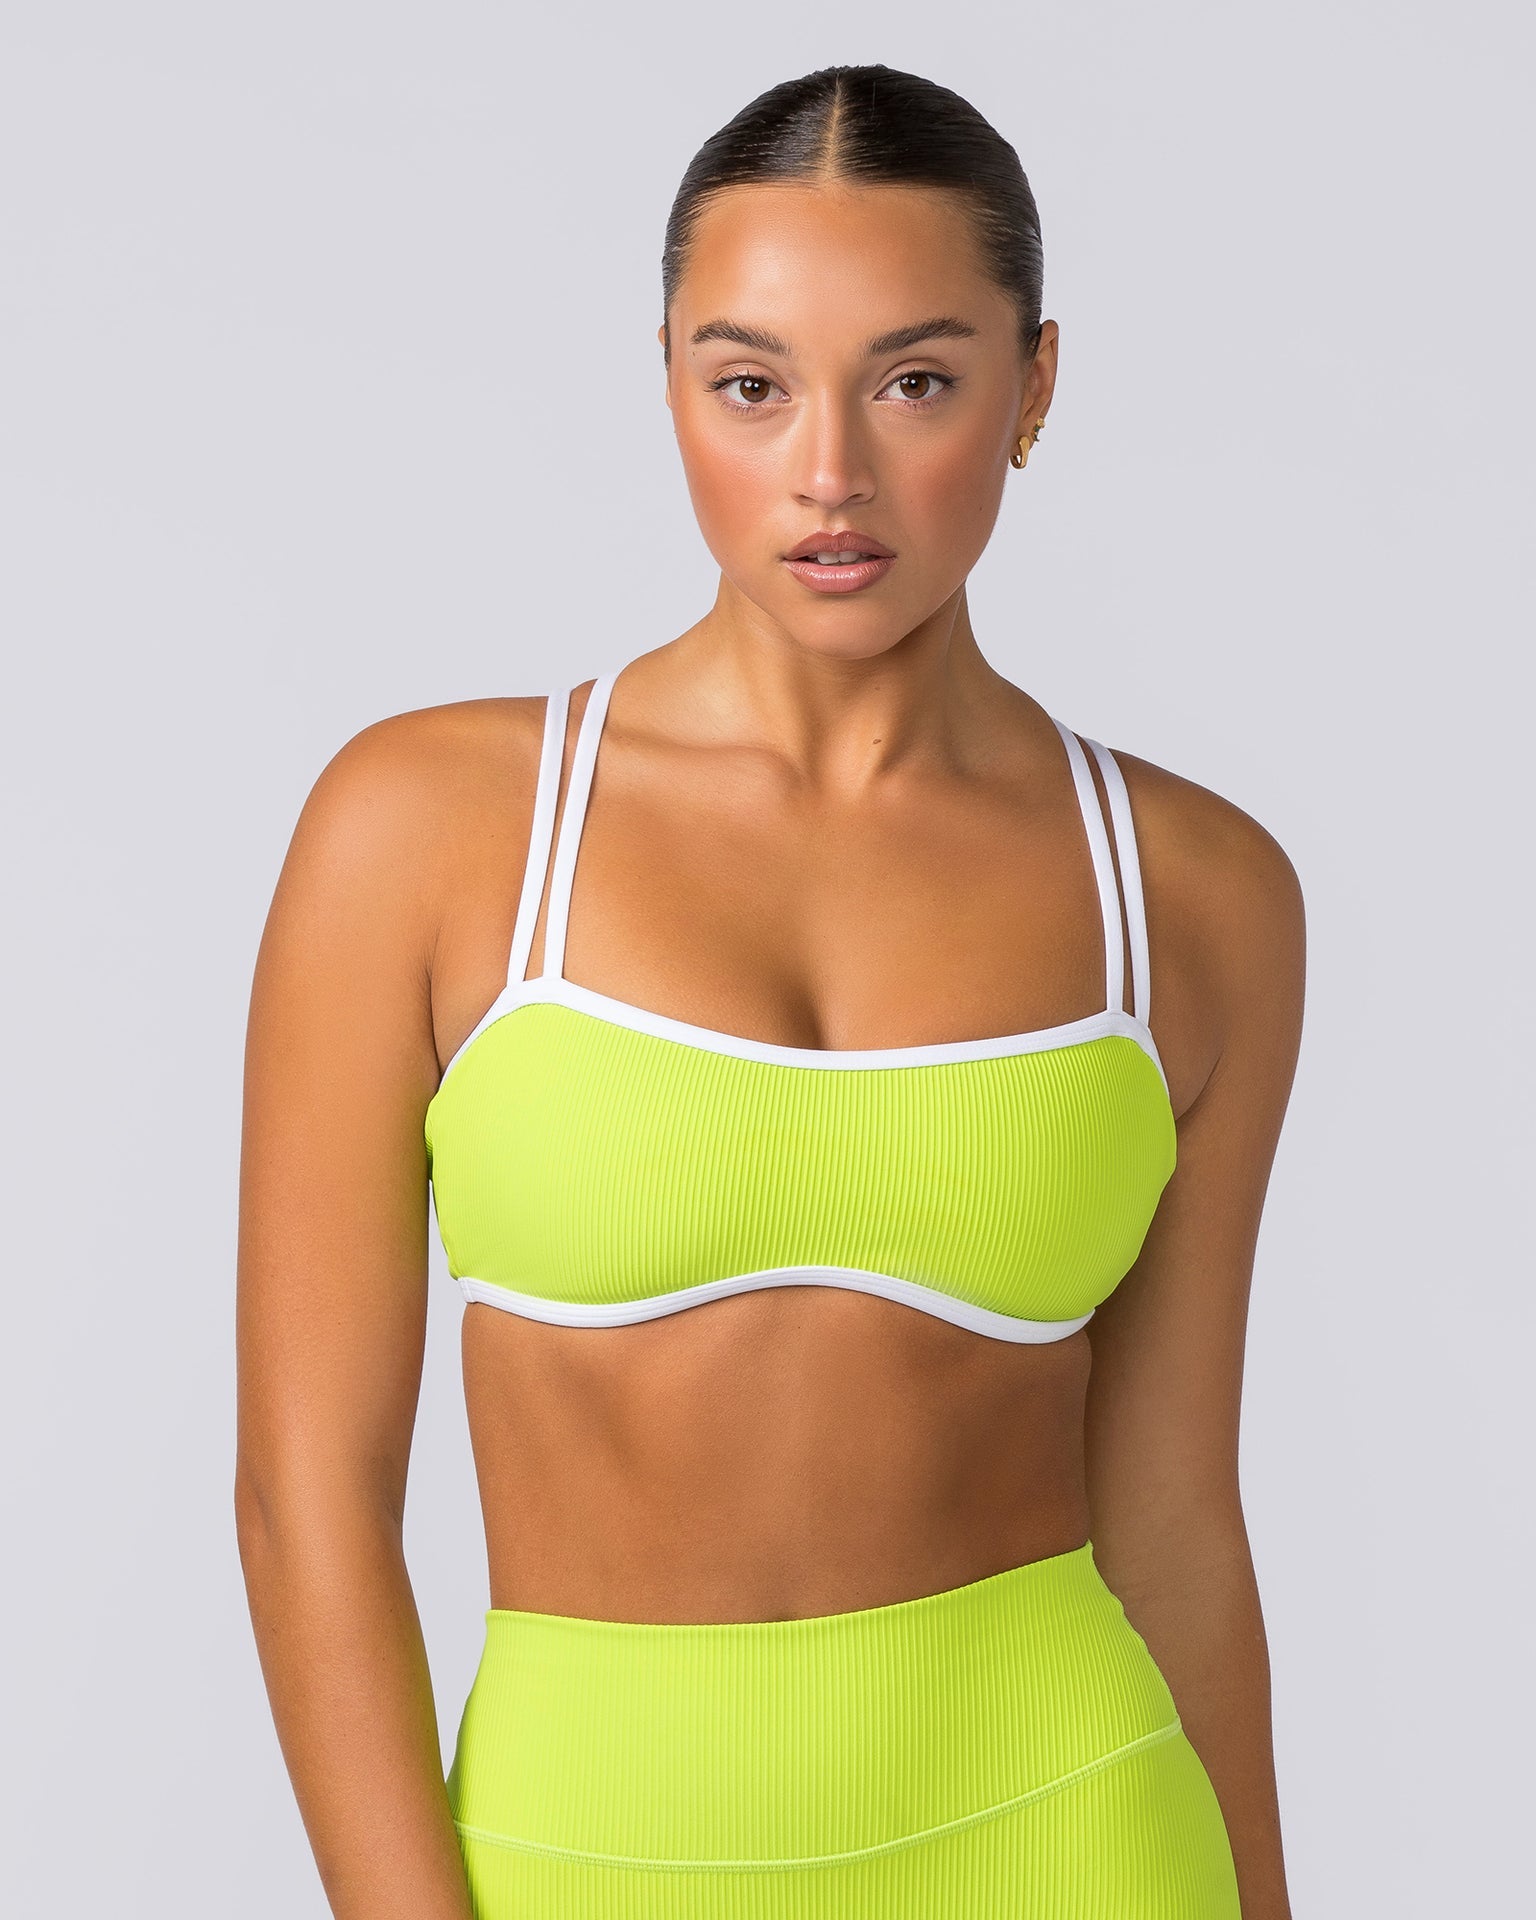 Muscle Nation Sports Bras Curves Rib Bralette - Cyber Lime